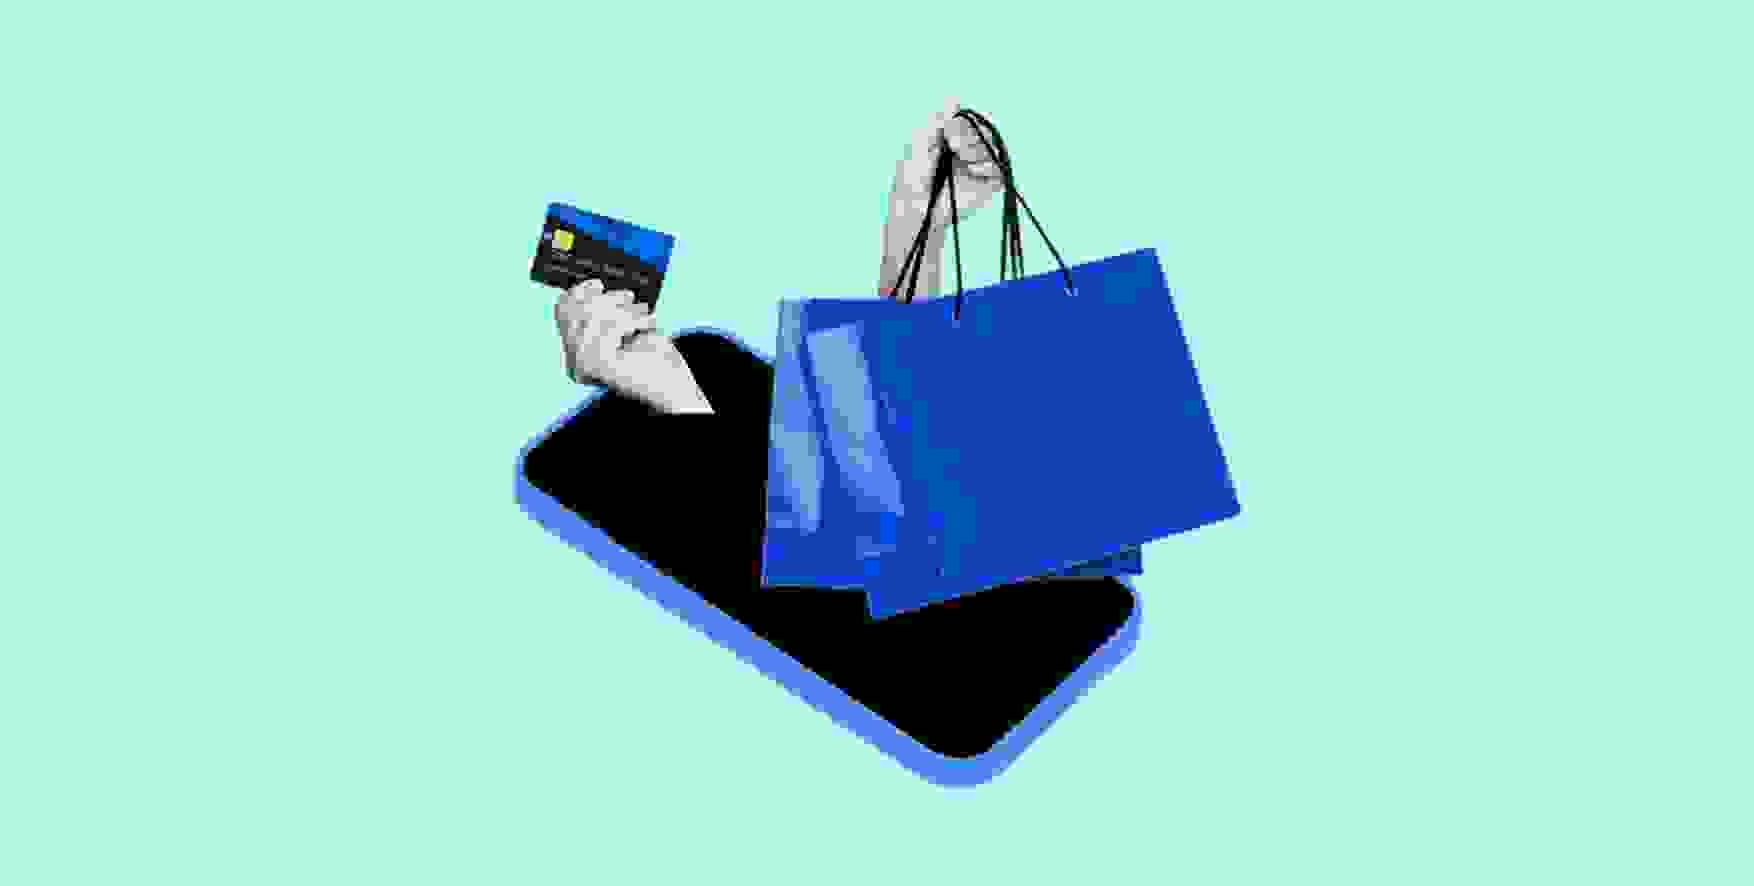 hands with a credit card and with purchases stick out of the phone